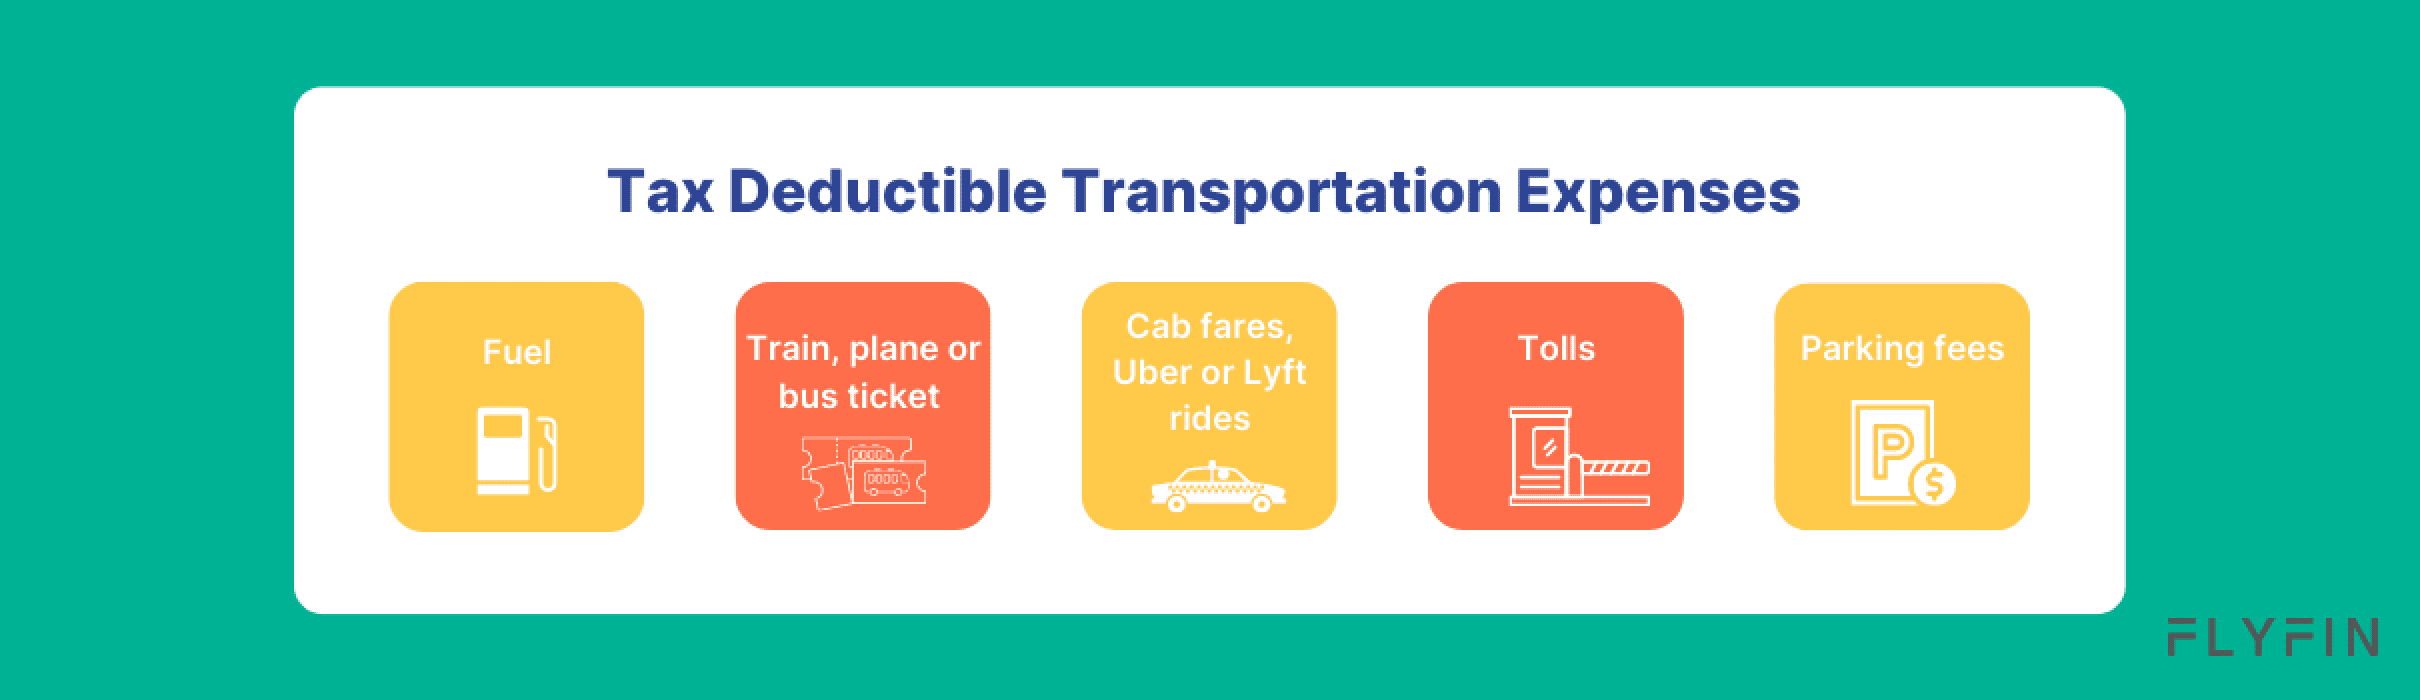 What transportation expenses <span style="background: linear-gradient(101.76deg, #19ACA4 1.98%, #3563CD 100.59%);
    -webkit-background-clip: text;
    -webkit-text-fill-color: transparent;
    background-clip: text;
    text-fill-color: transparent;">are tax deductible?</span>